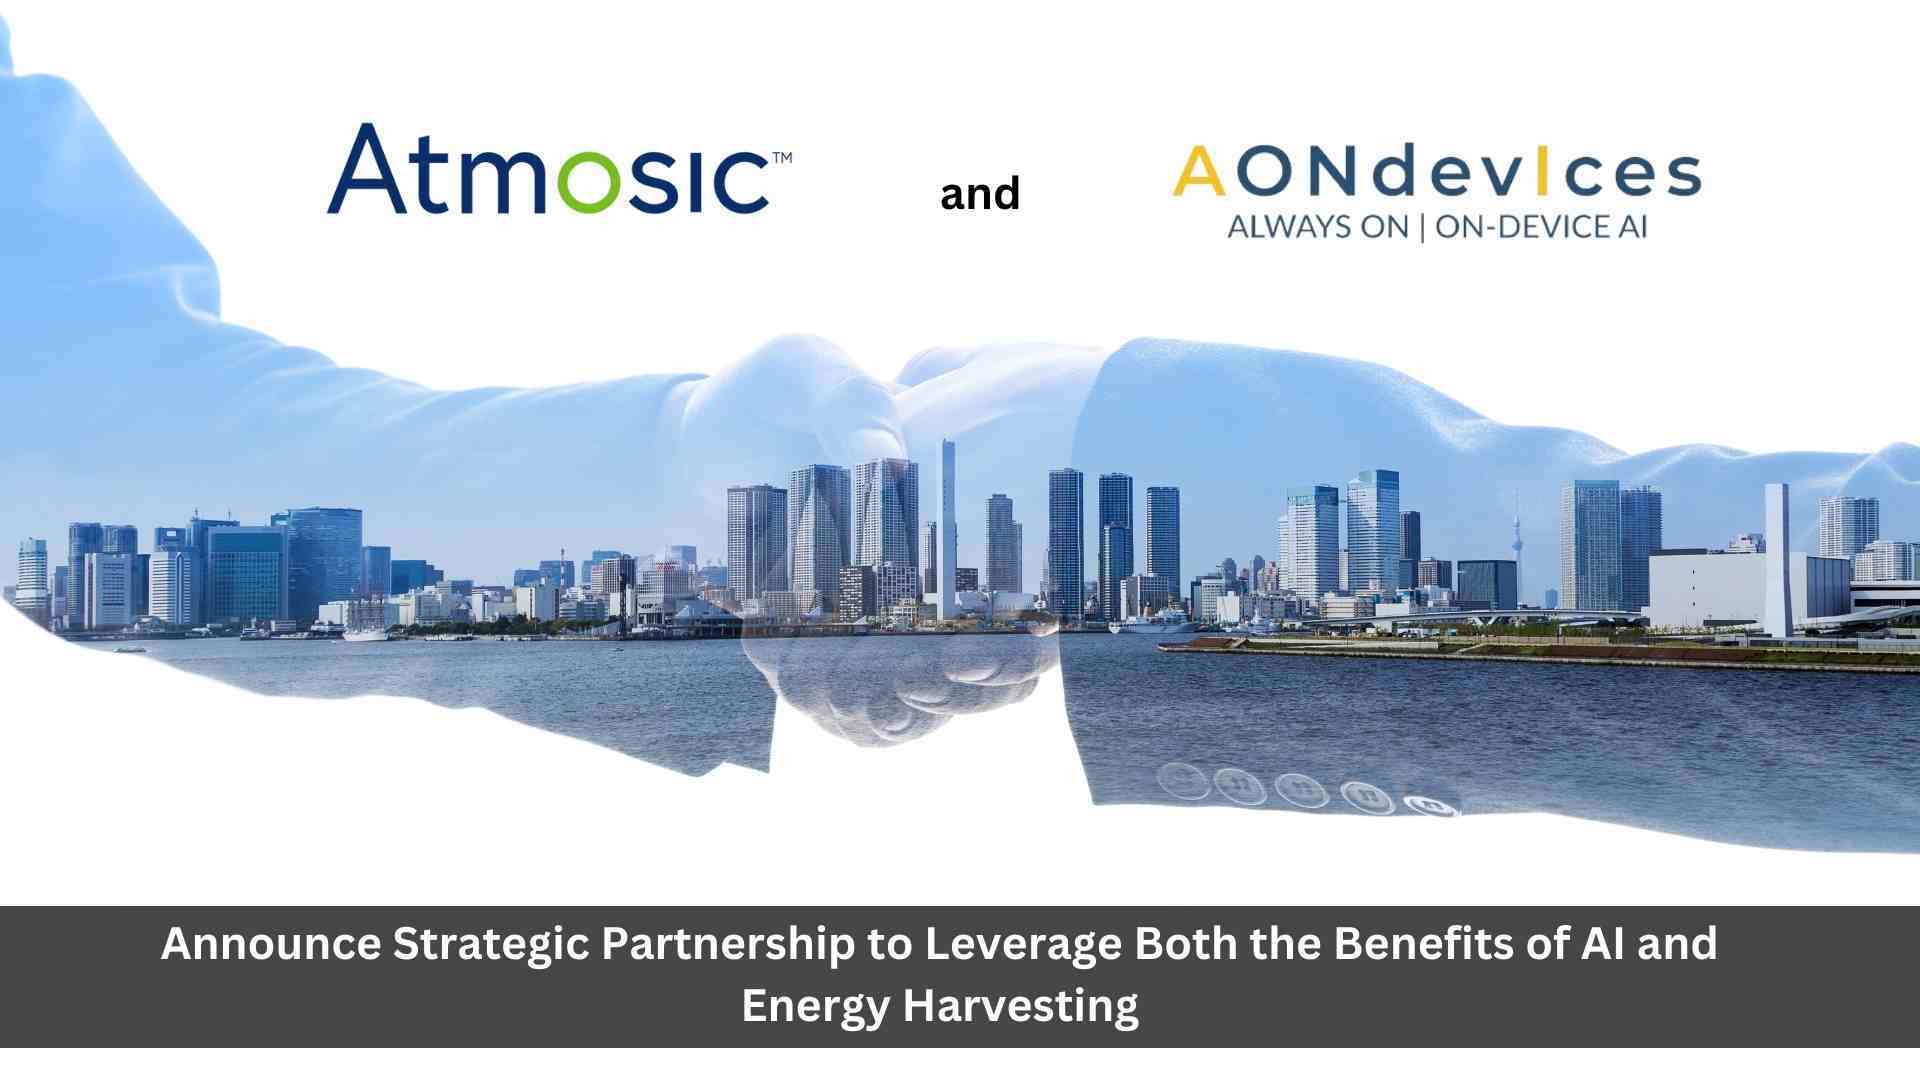 Atmosic and AONDevices announce strategic partnership to leverage both the benefits of AI and energy harvesting to lower power consumption in AIoT Smart Home devices